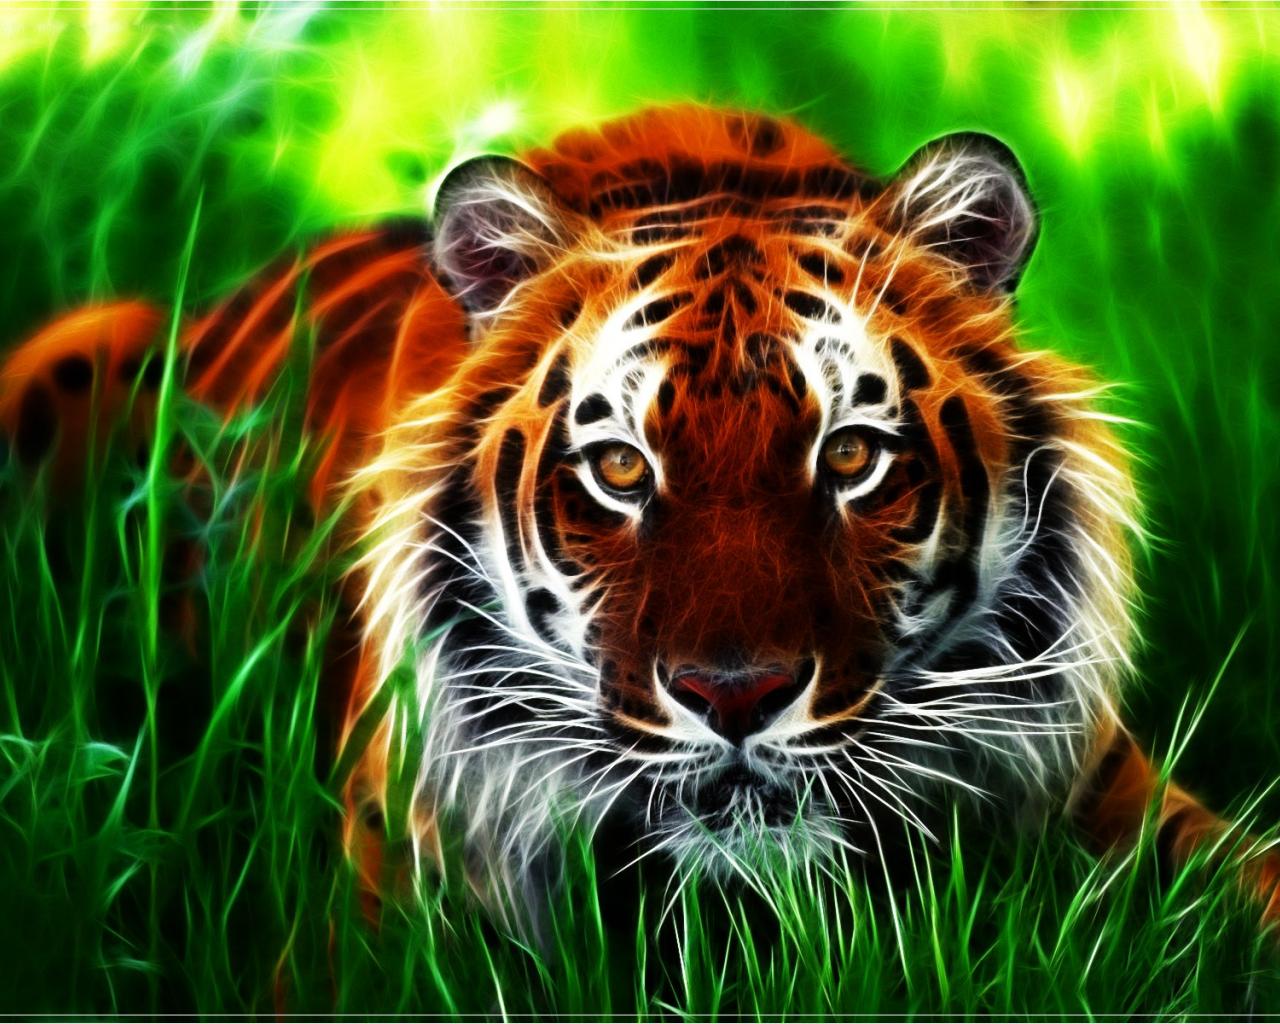 National geographics tiger wallpaper - (#34583) - High Quality and ...